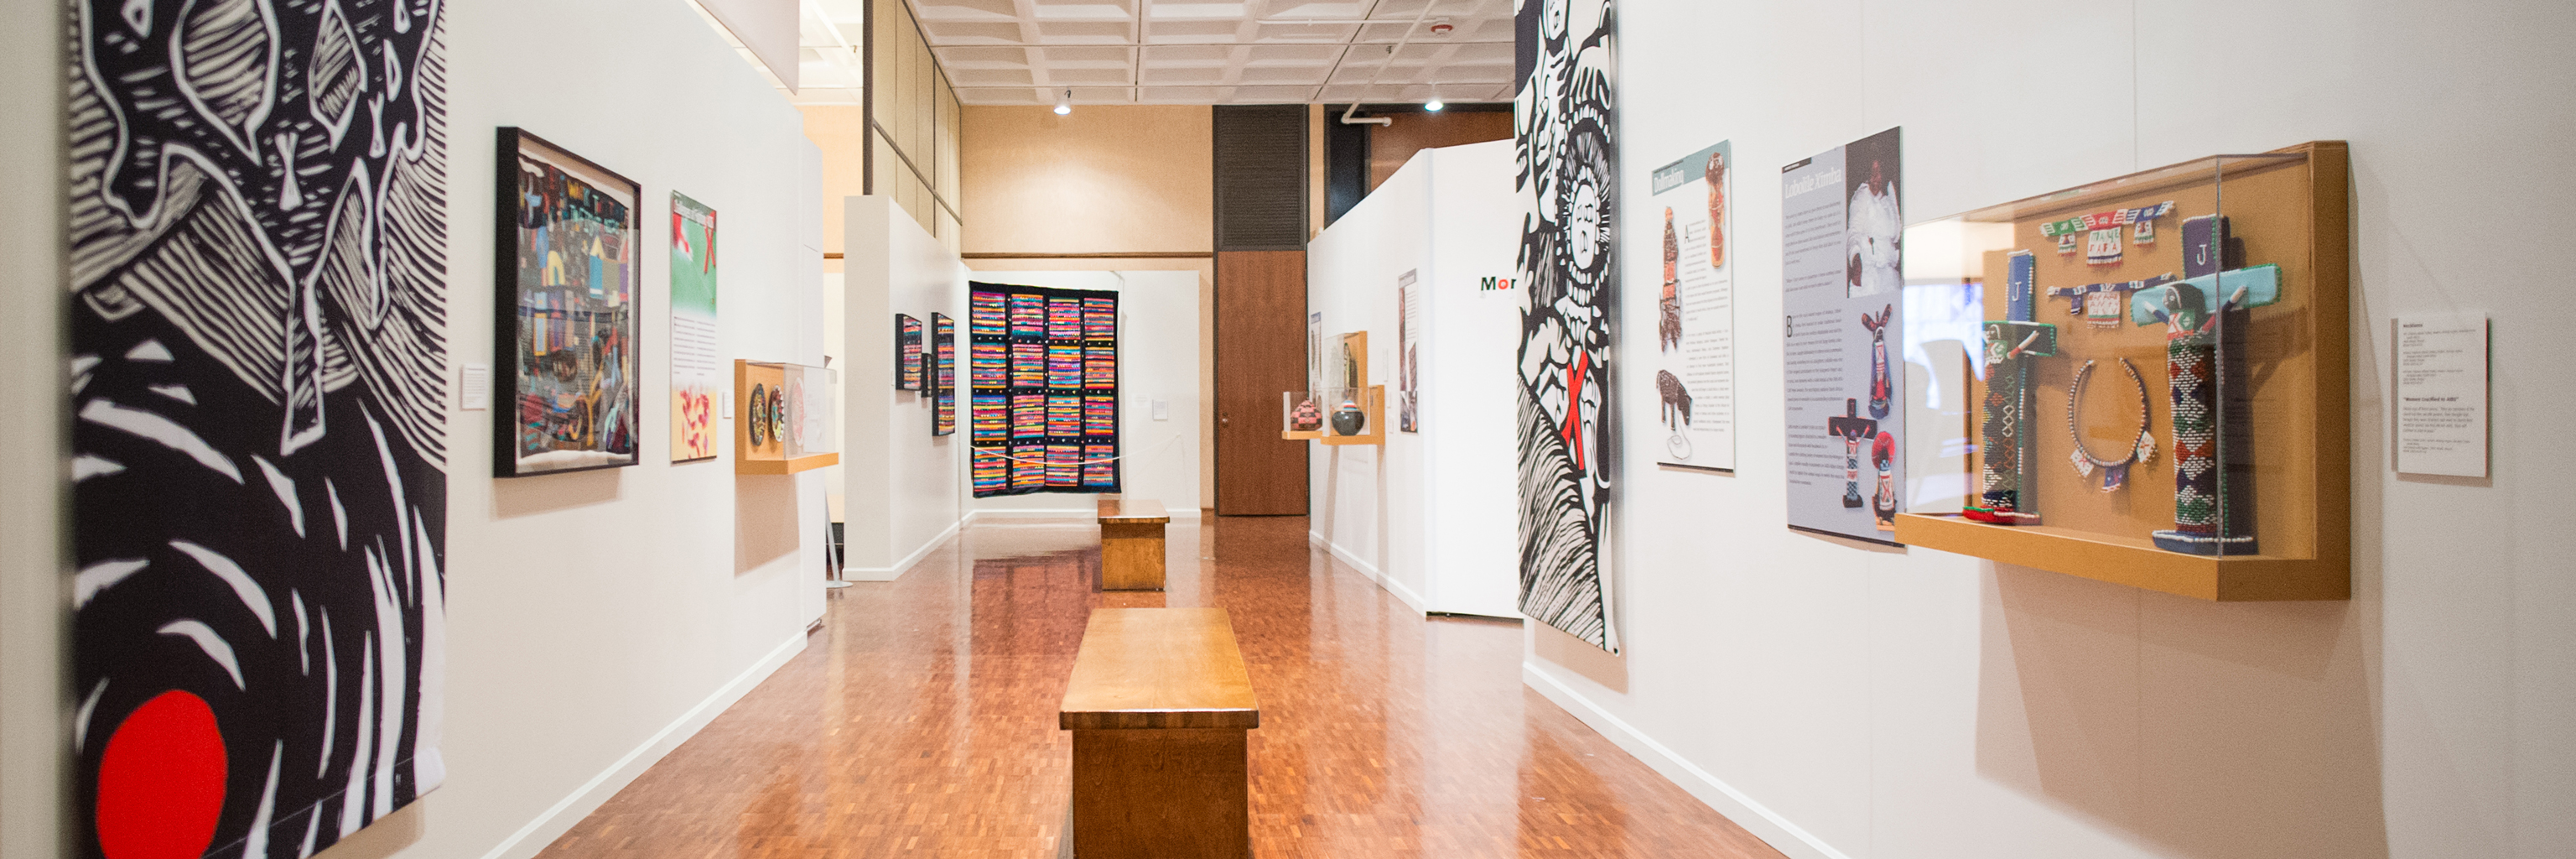 A gallery exhibit at the IU Art Museum.